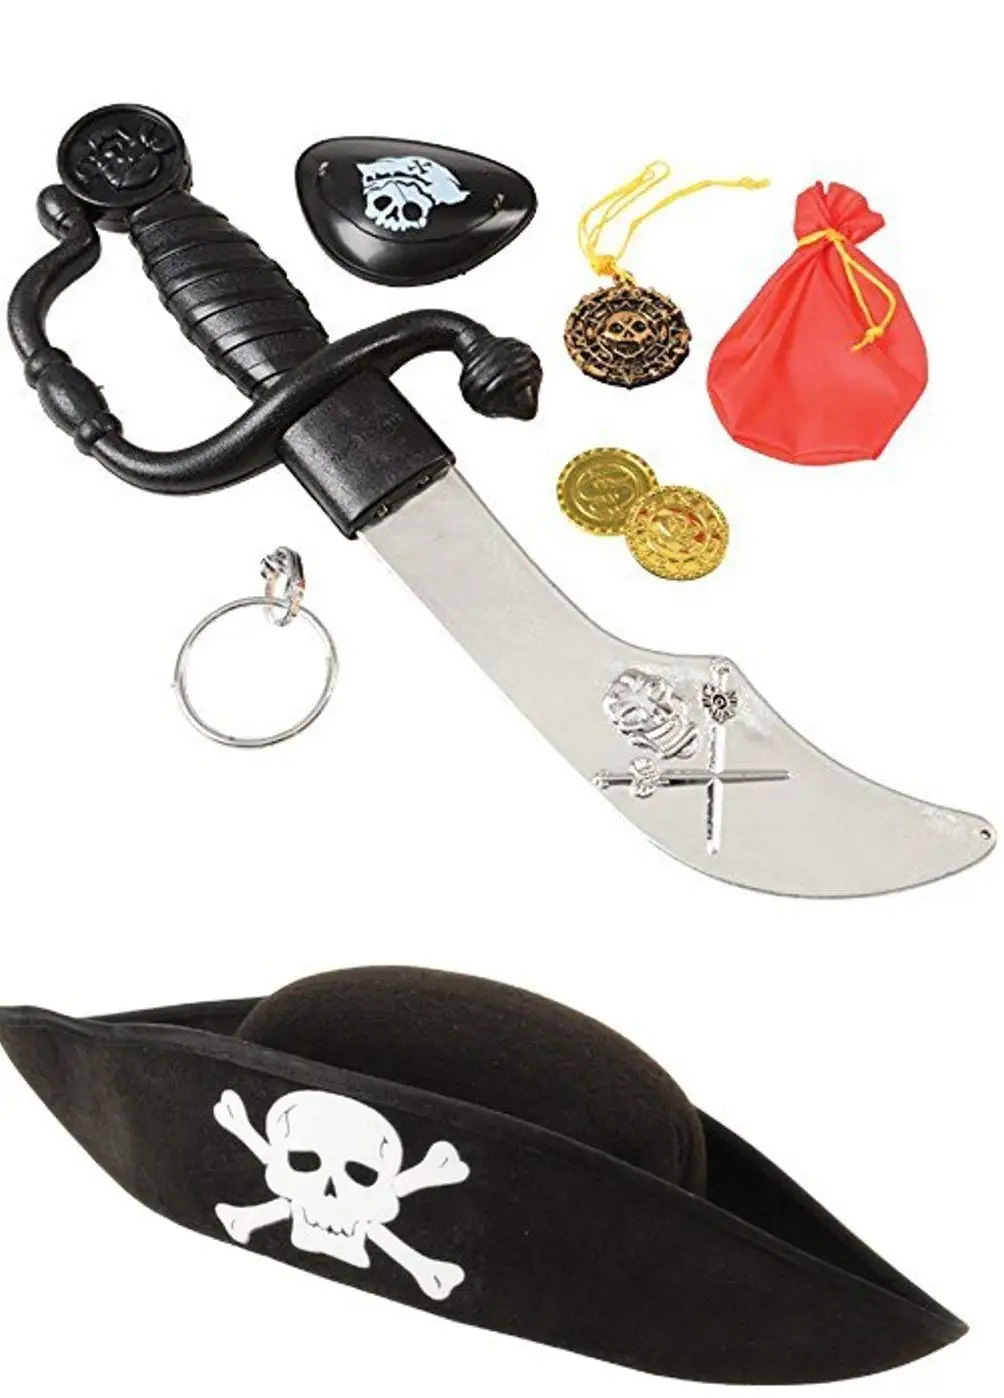 Buy Hsctek Boys Pirate Costume Kids Pirate Role Play Dress Up Set With